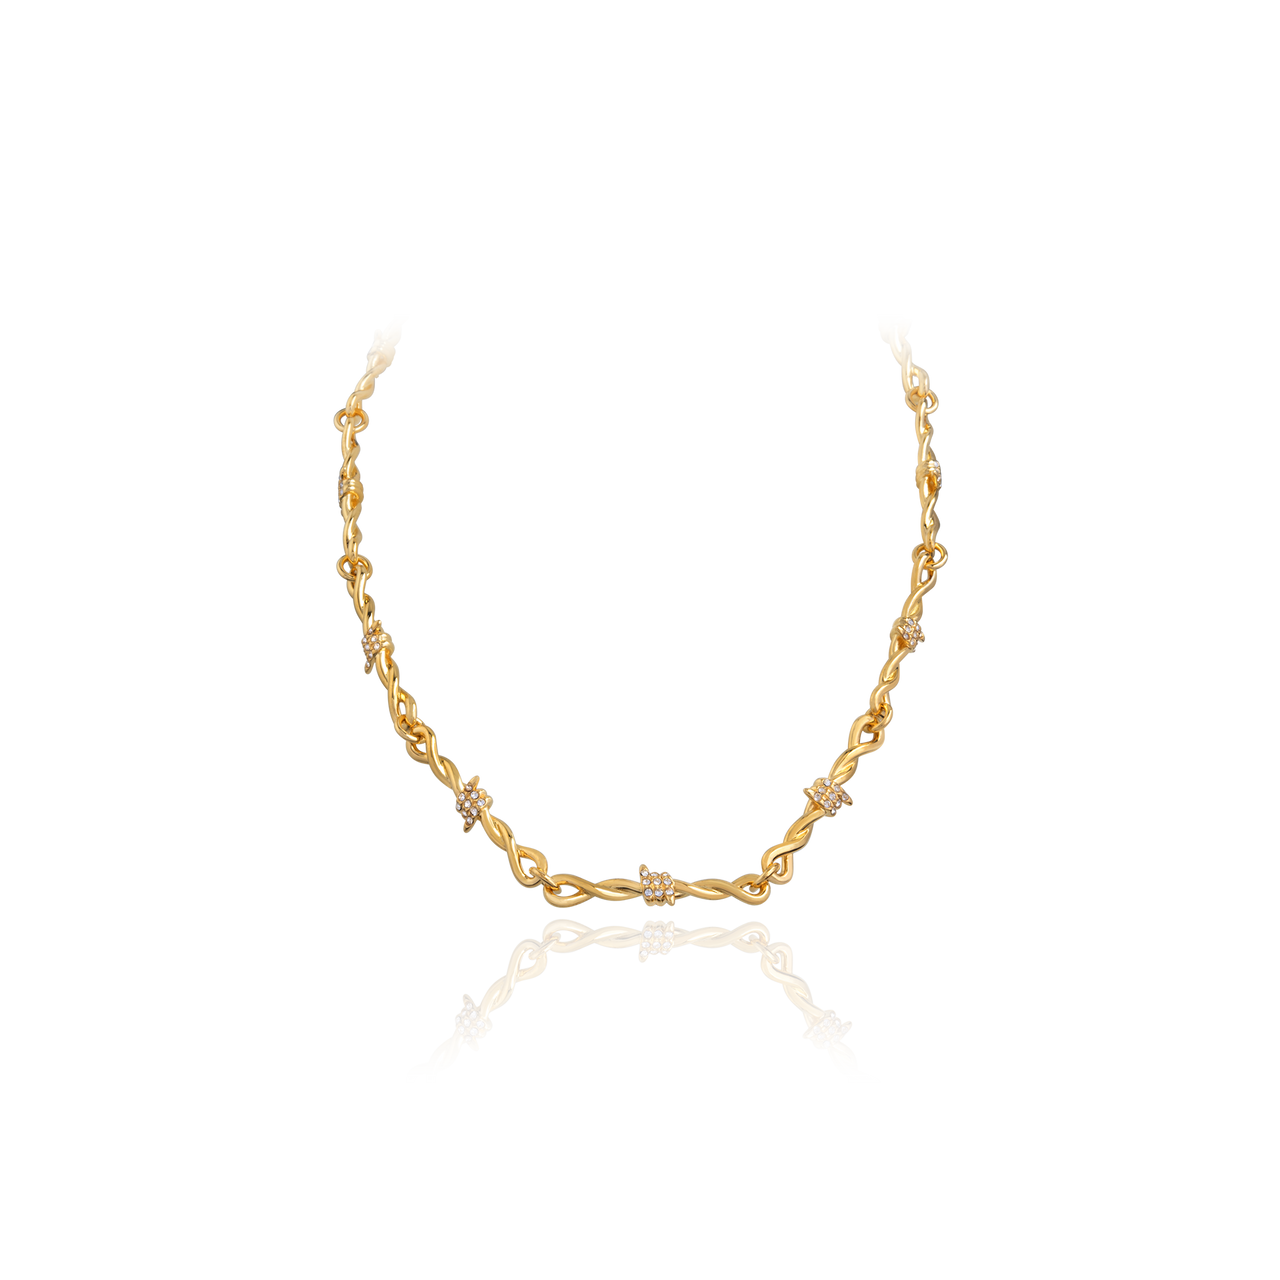 Wildwire Necklace